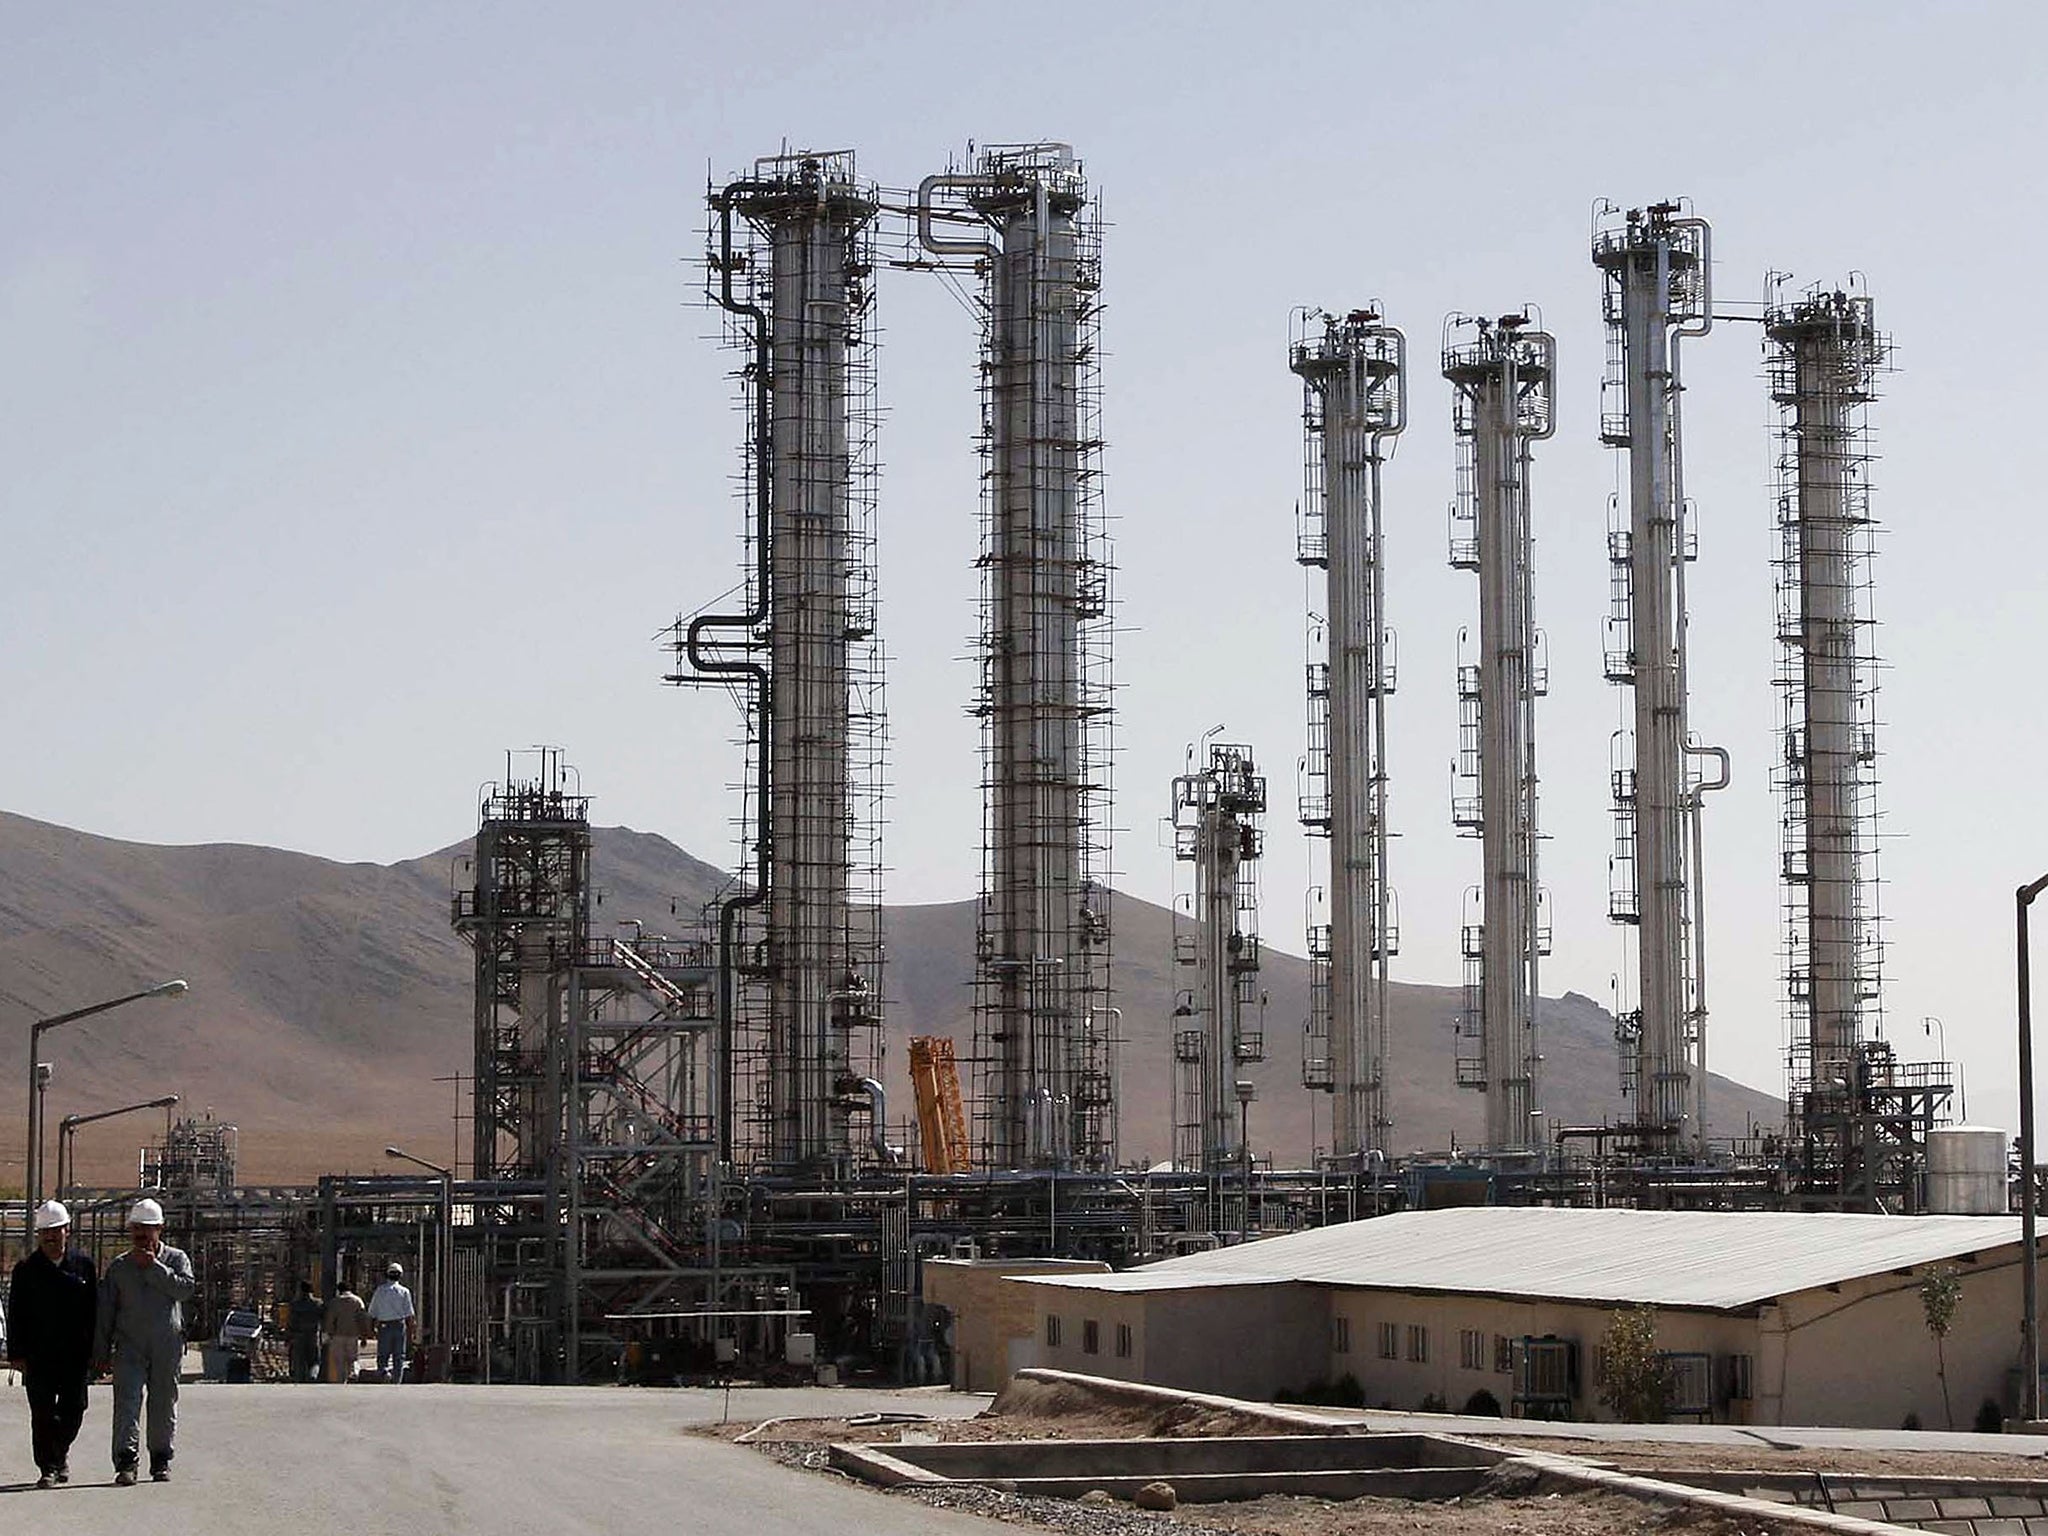 Construction follows growing tensions with international powers who fear a nuclear-capable Iran